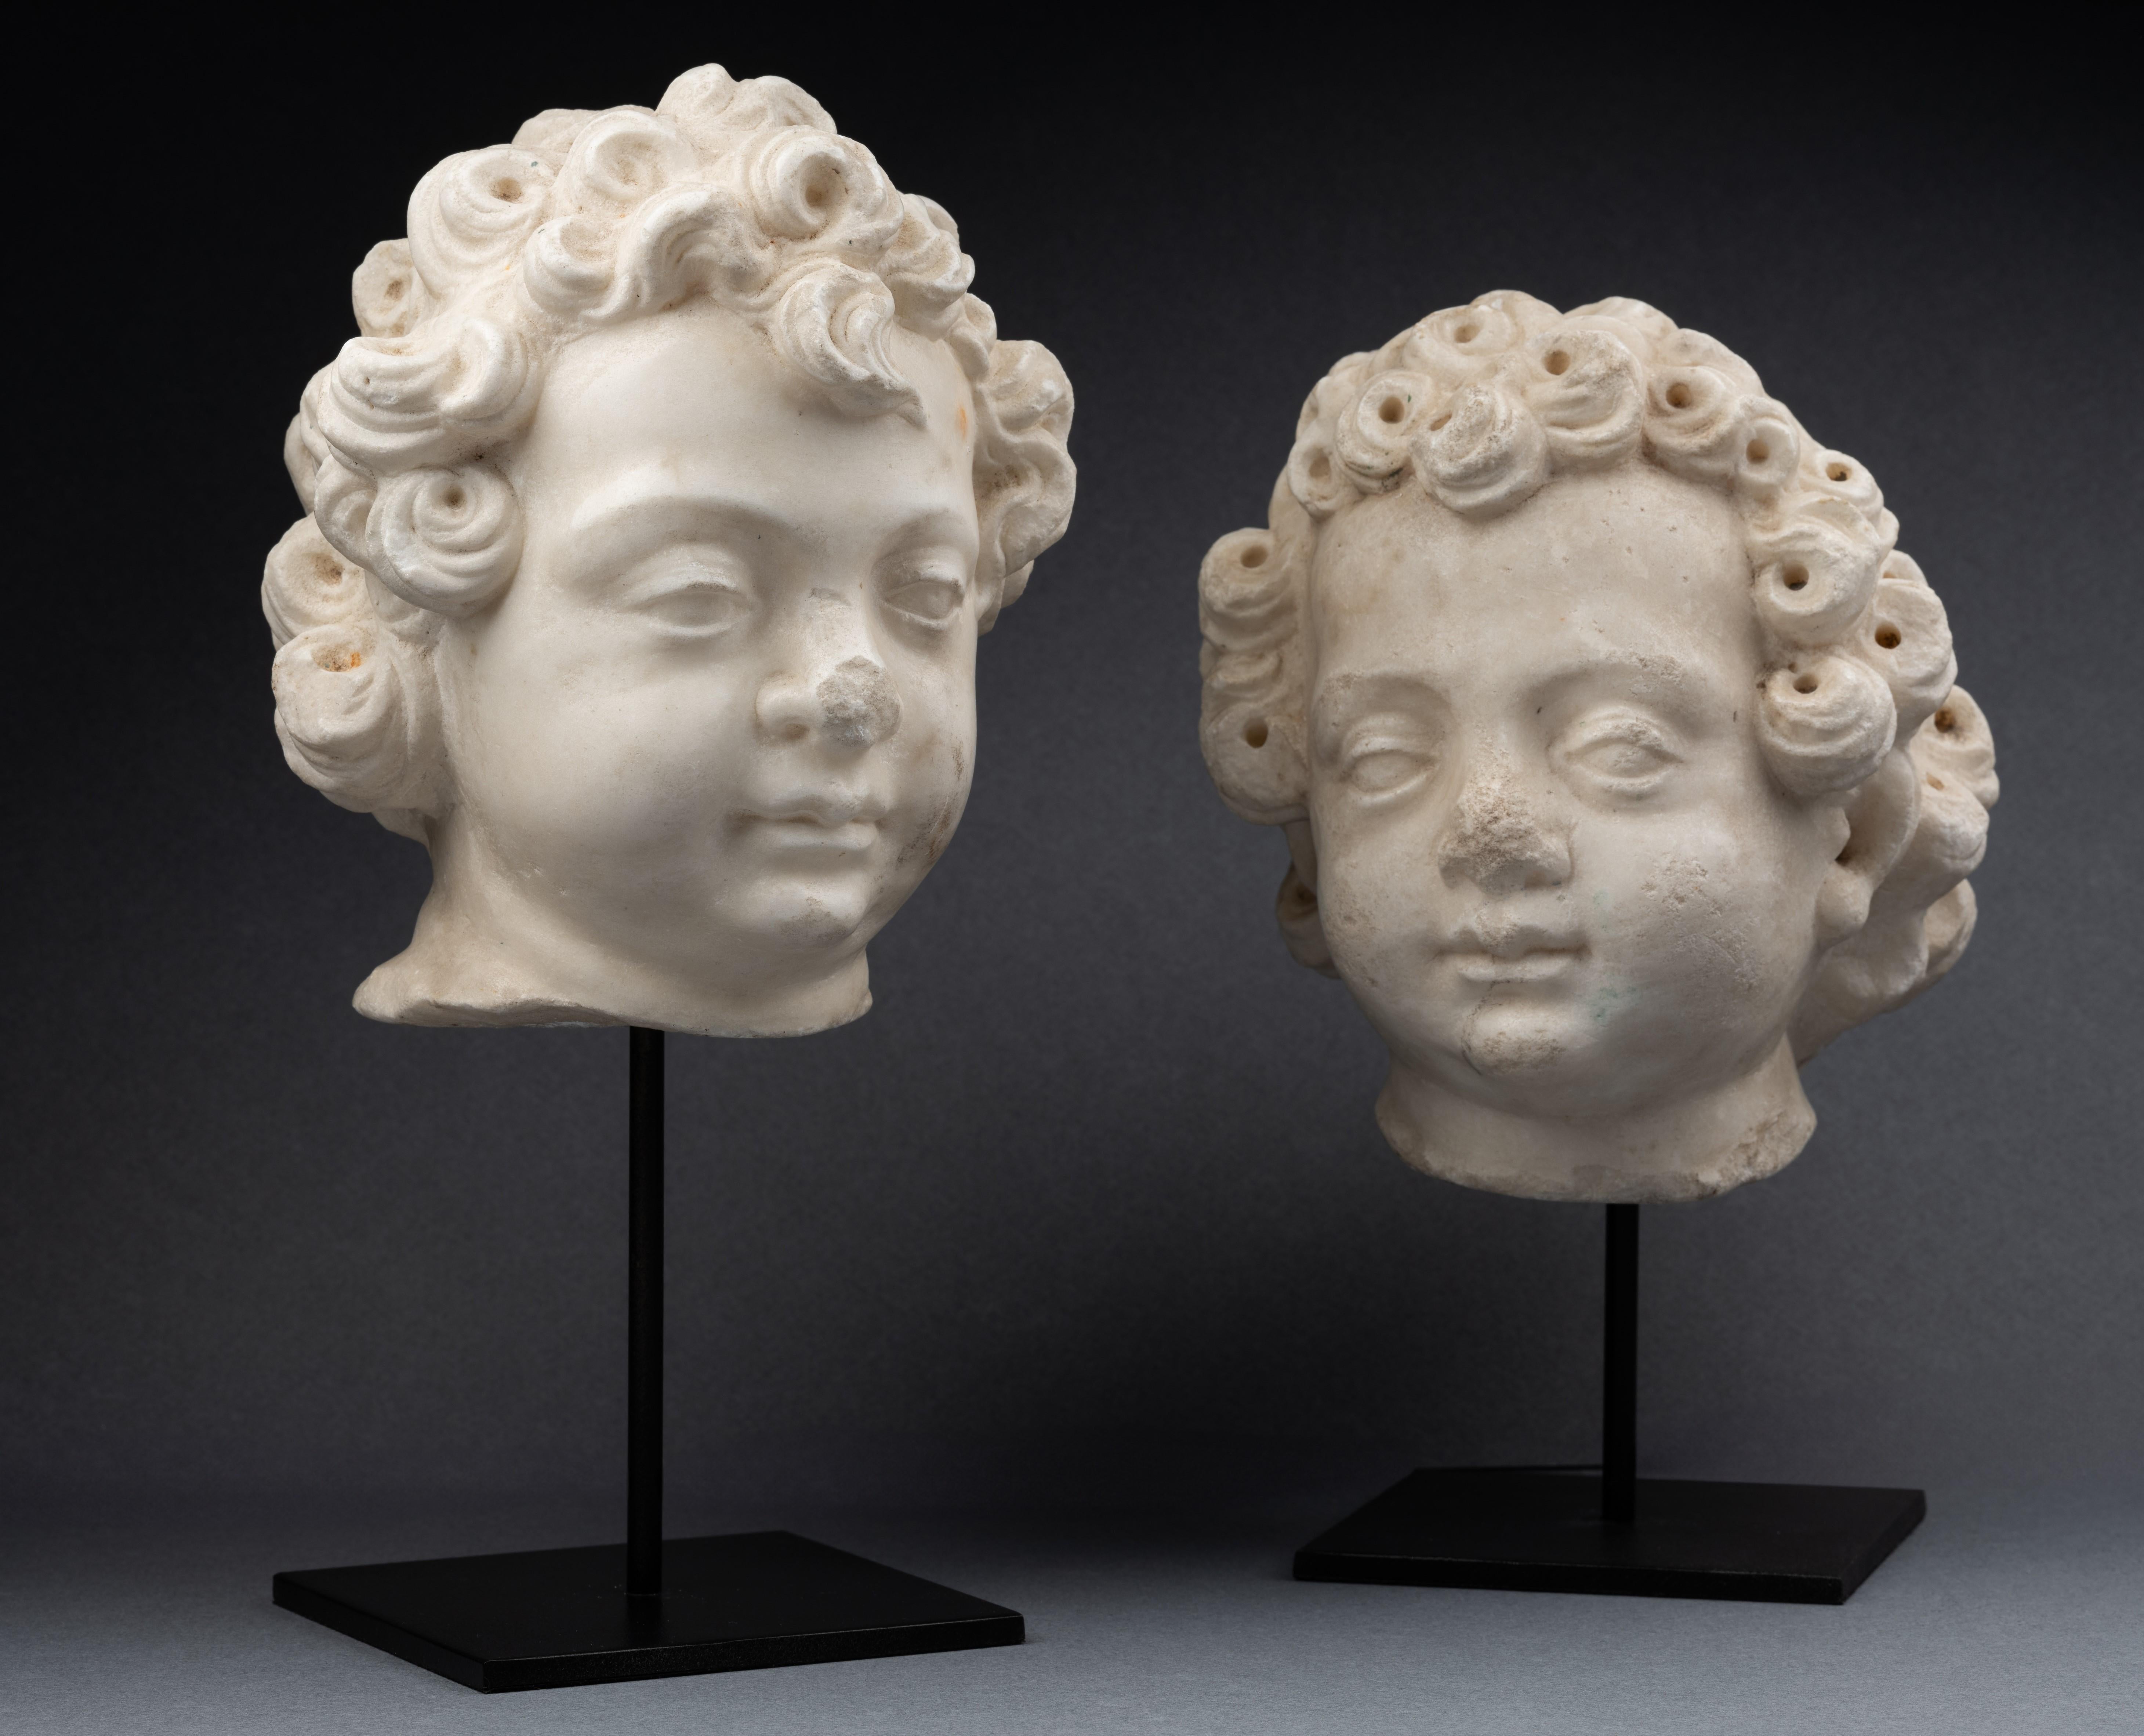 A 16th century Renaissance North Italian marble heads of two puttis - Sculpture by Unknown